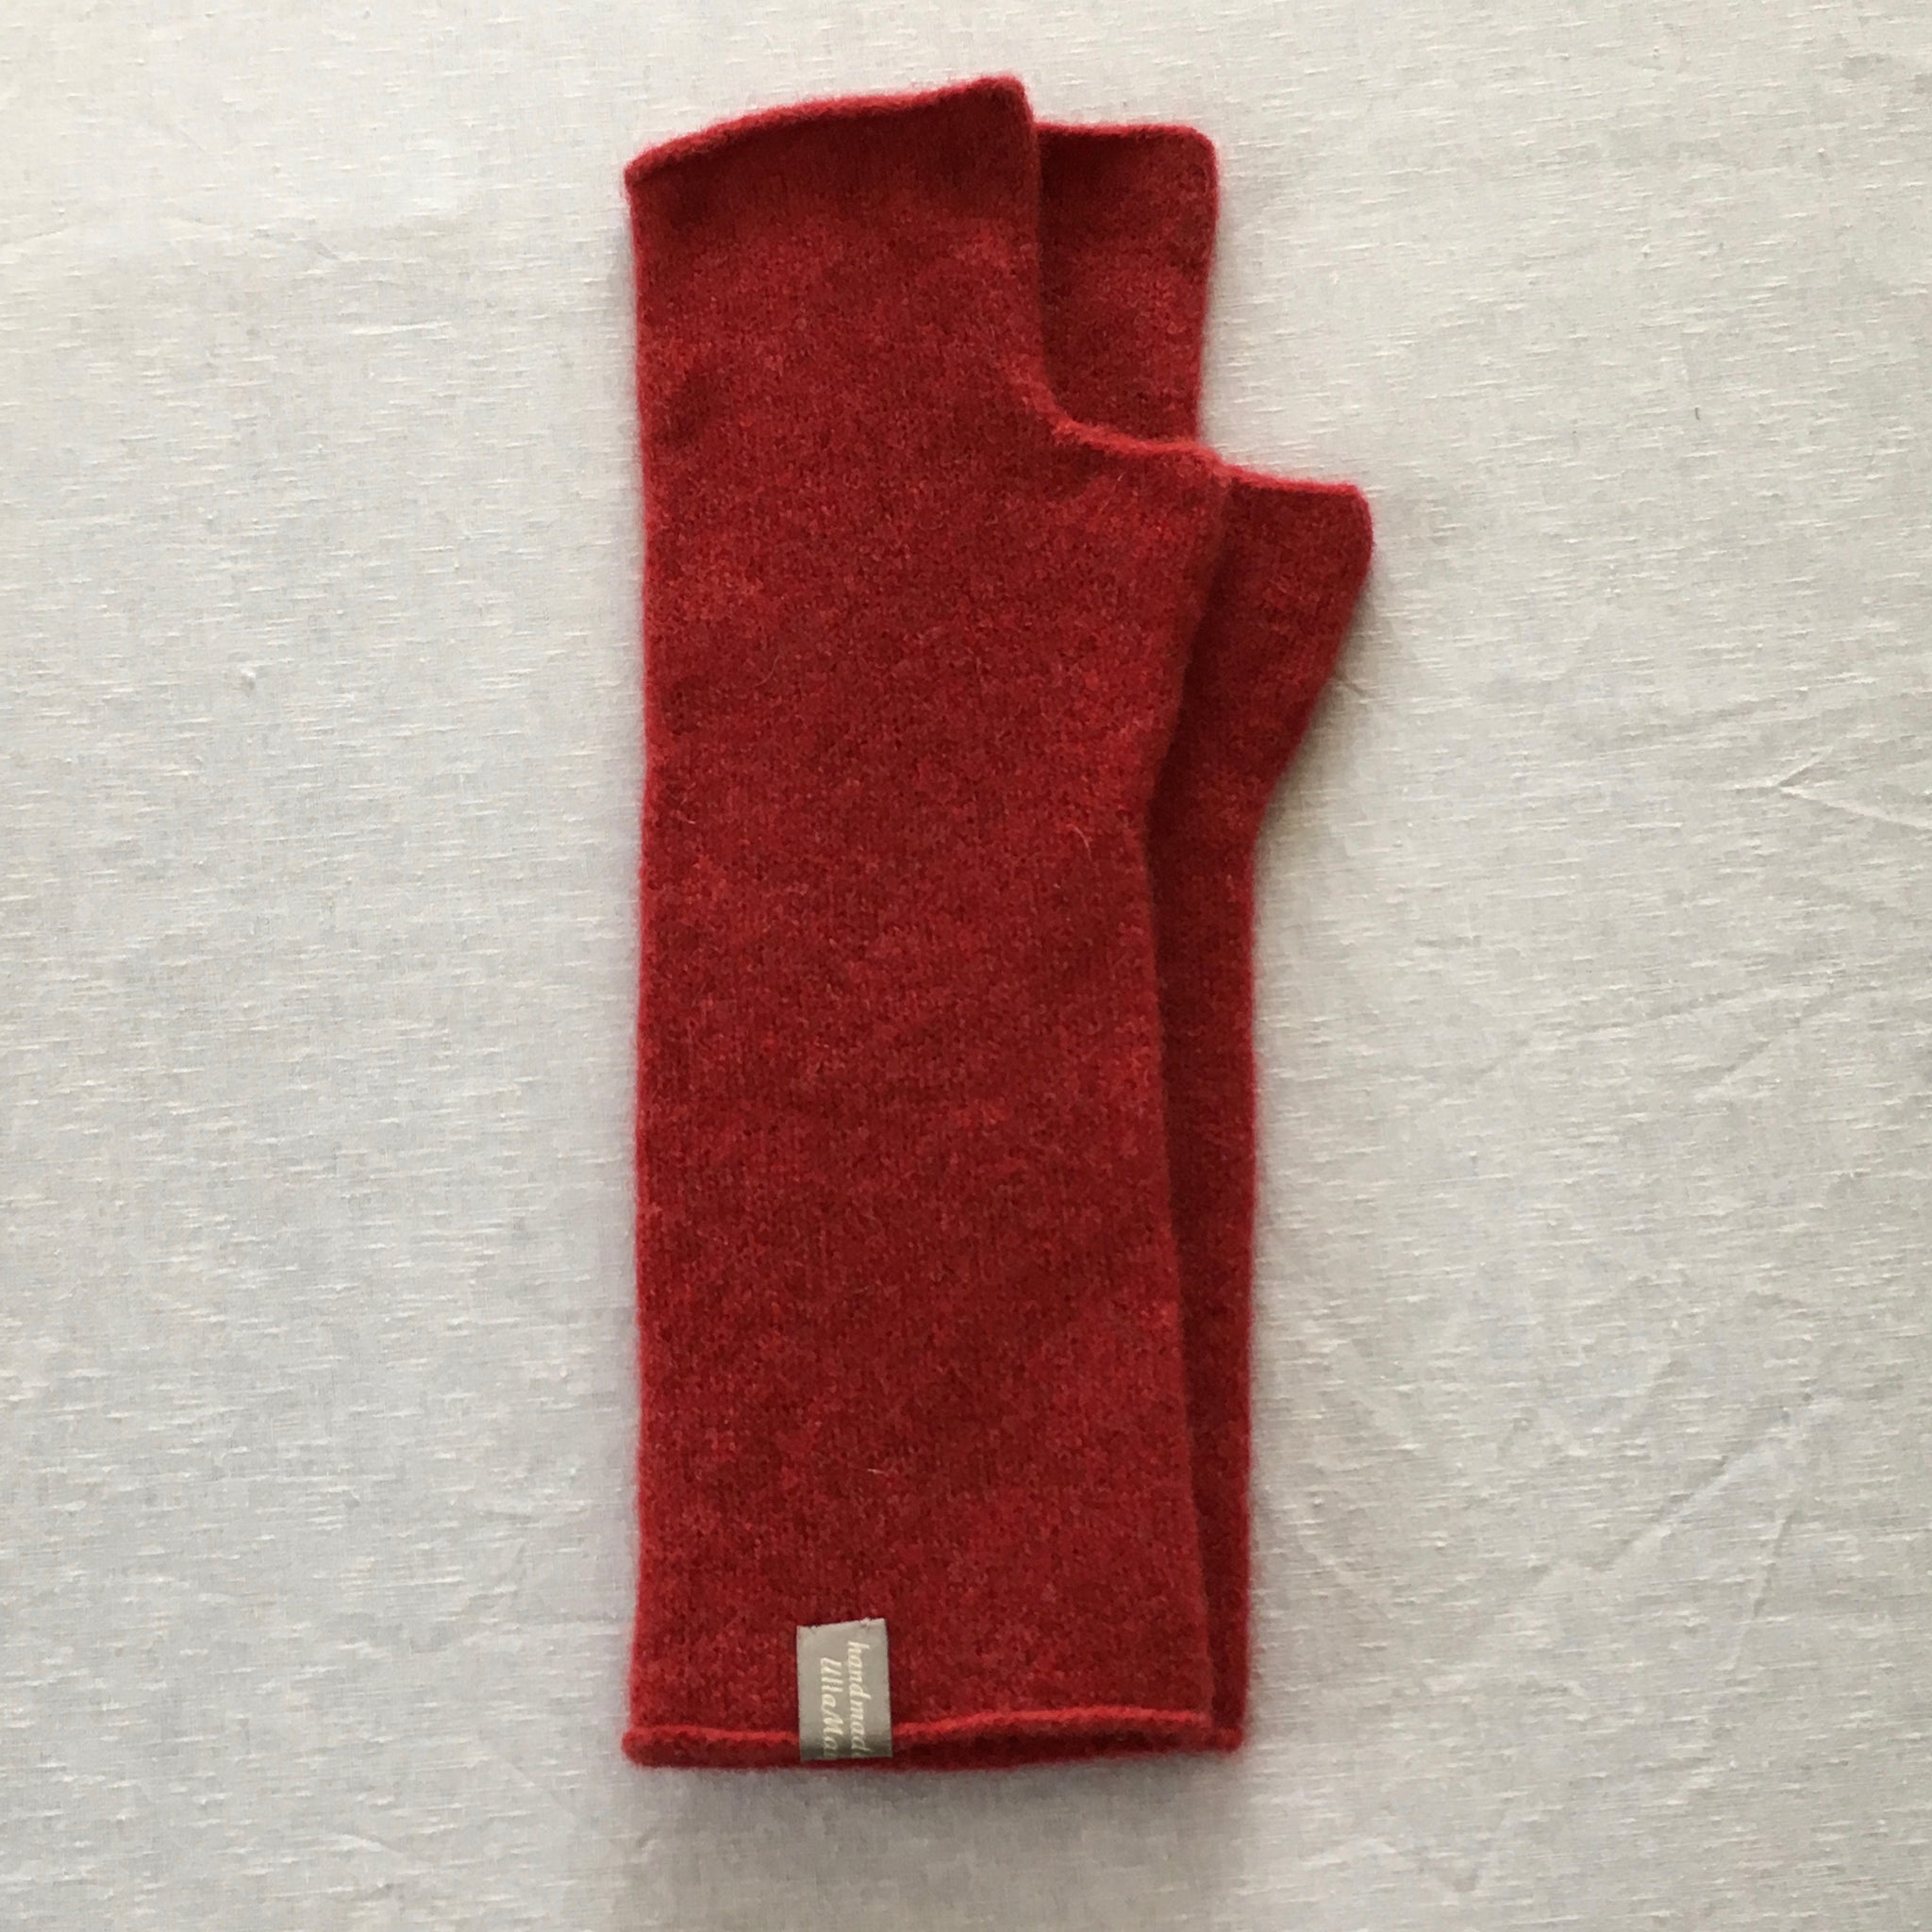 FinesseKnits, berry red